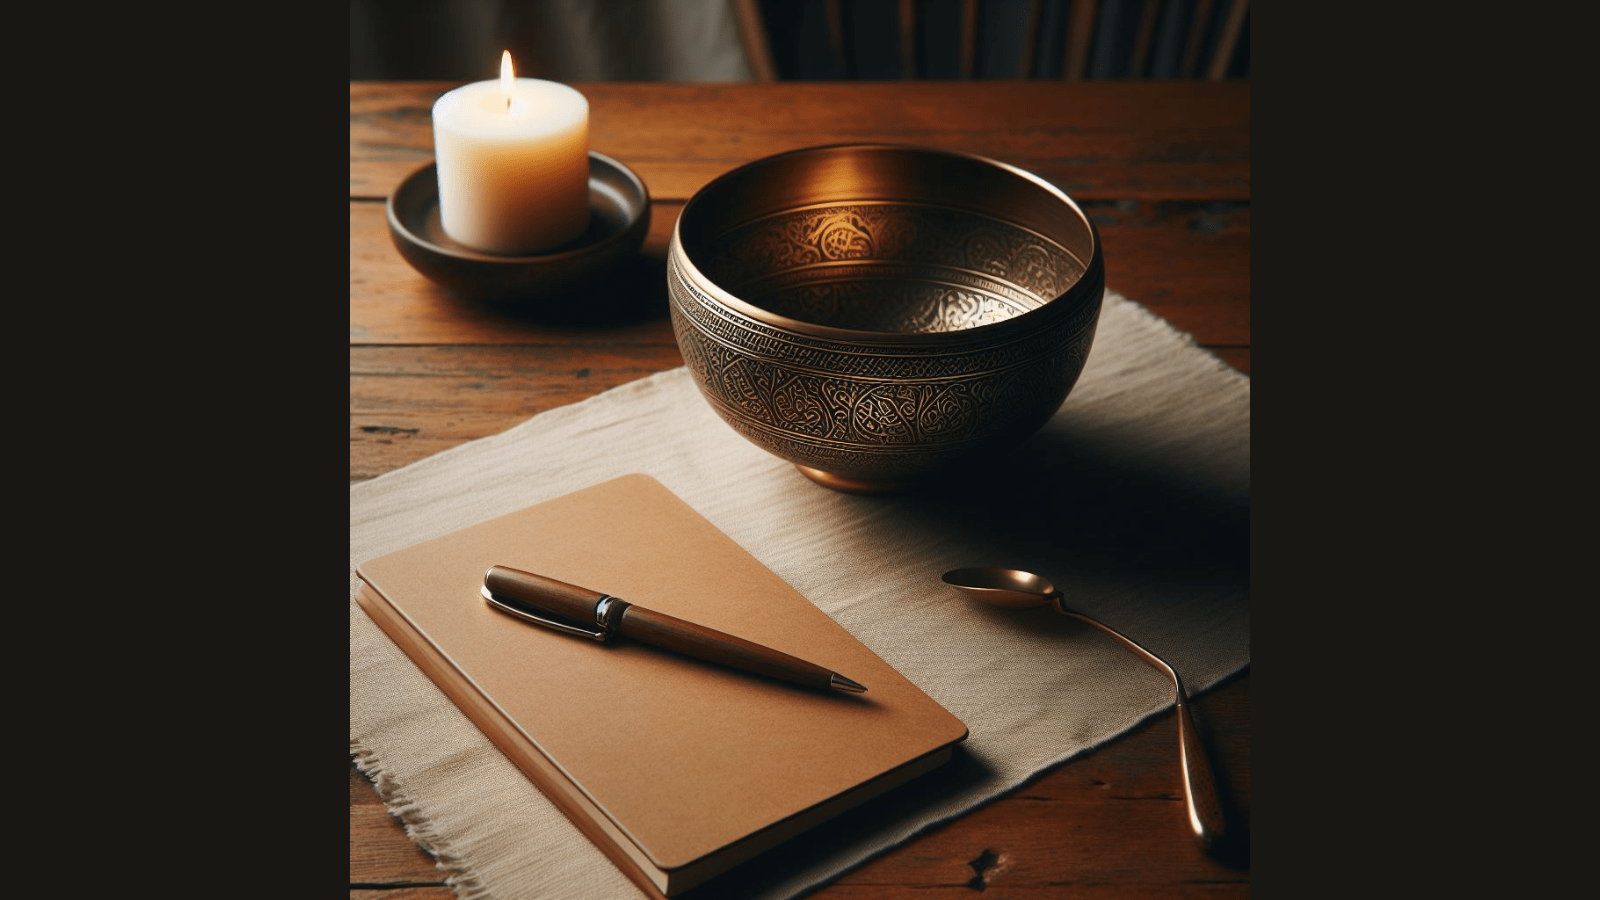 Upon a wooden table sits a candle in a metal bowl, and a brown covered journal with a red pen on top alongside an intricately decorated metal meditation bowl with spoon. These elements are placed on top of a natural linen placemat.